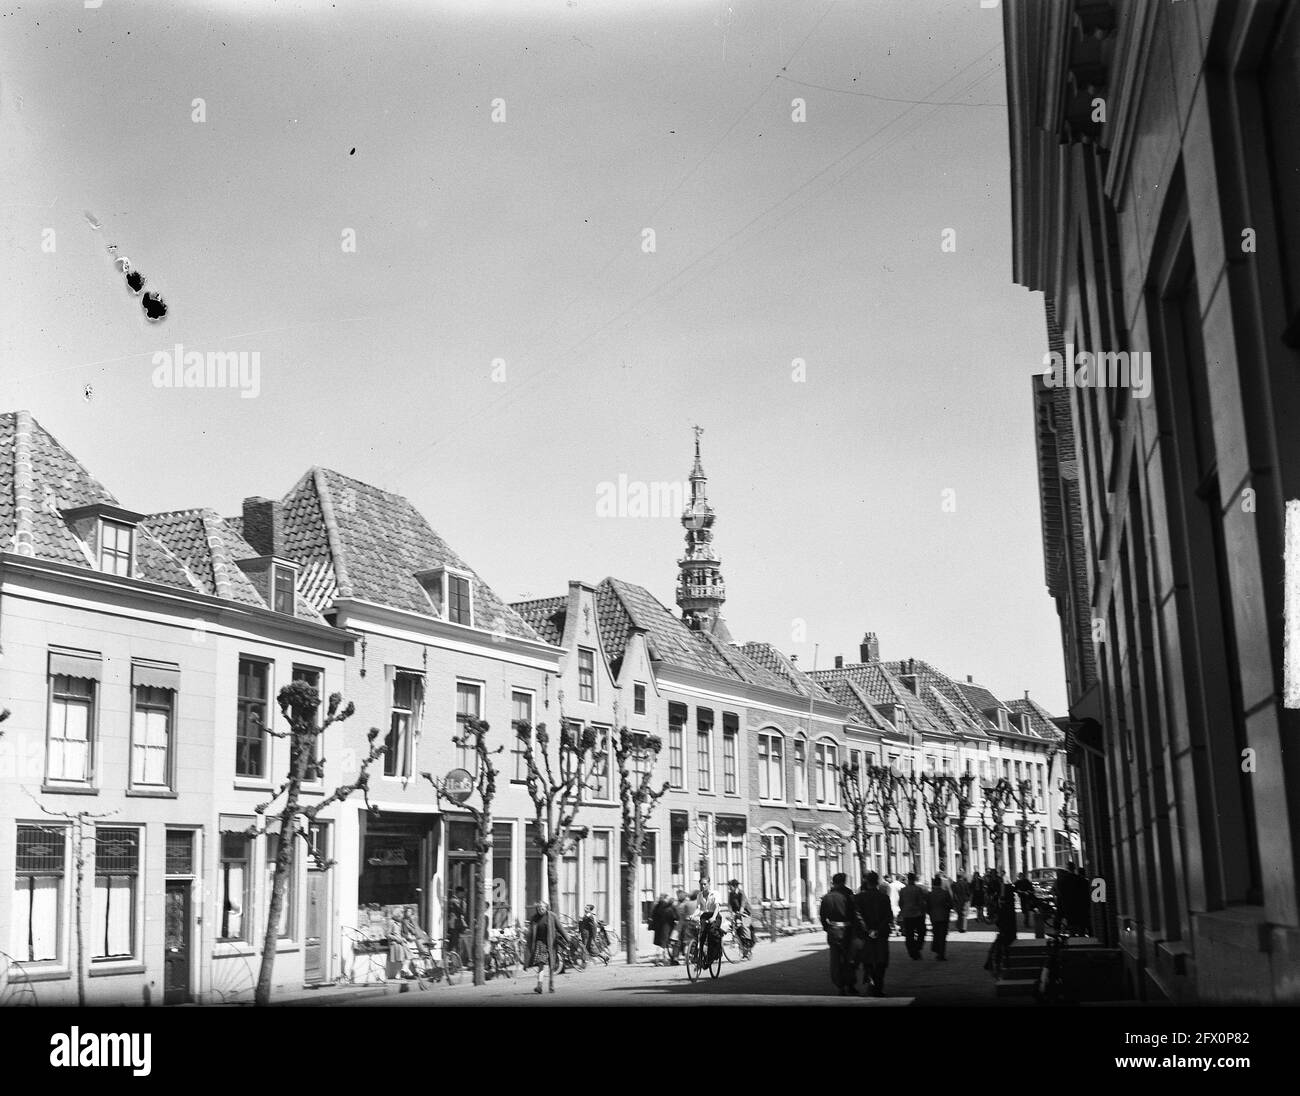 Zierikzee, 2 May 1949, townscapes, streets, The Netherlands, 20th century press agency photo, news to remember, documentary, historic photography 1945-1990, visual stories, human history of the Twentieth Century, capturing moments in time Stock Photo